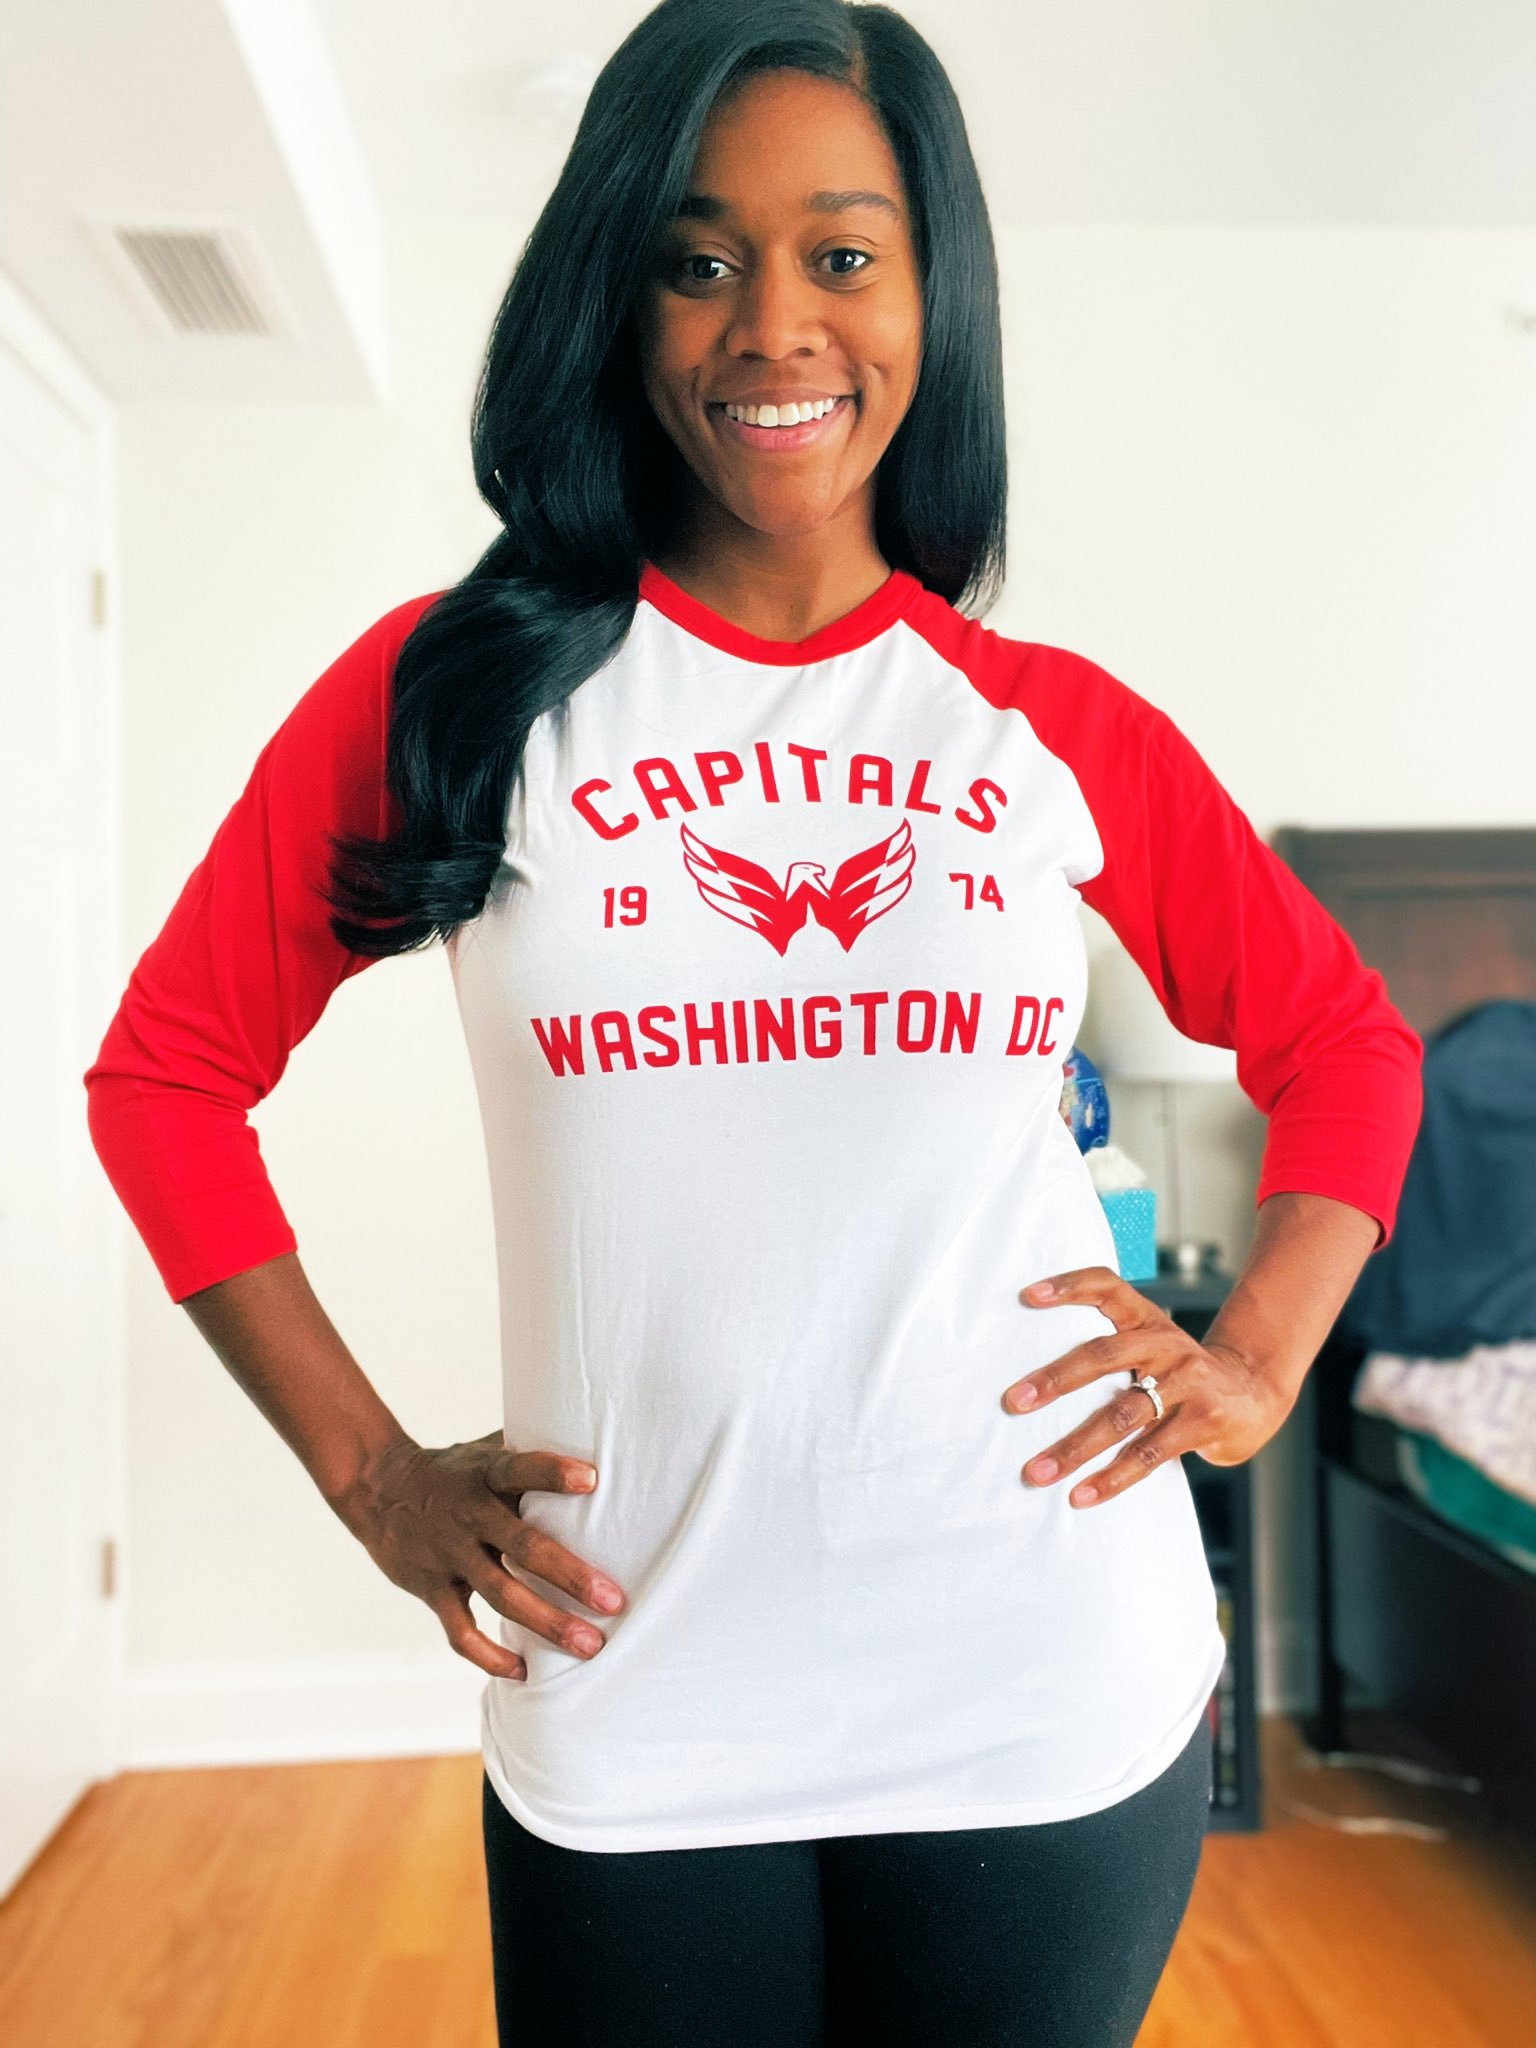 Capitals Generate Nearly $500,000 In Merchandise Sales At Capital One Arena  For Game 3 Against VGK - LVSportsBiz